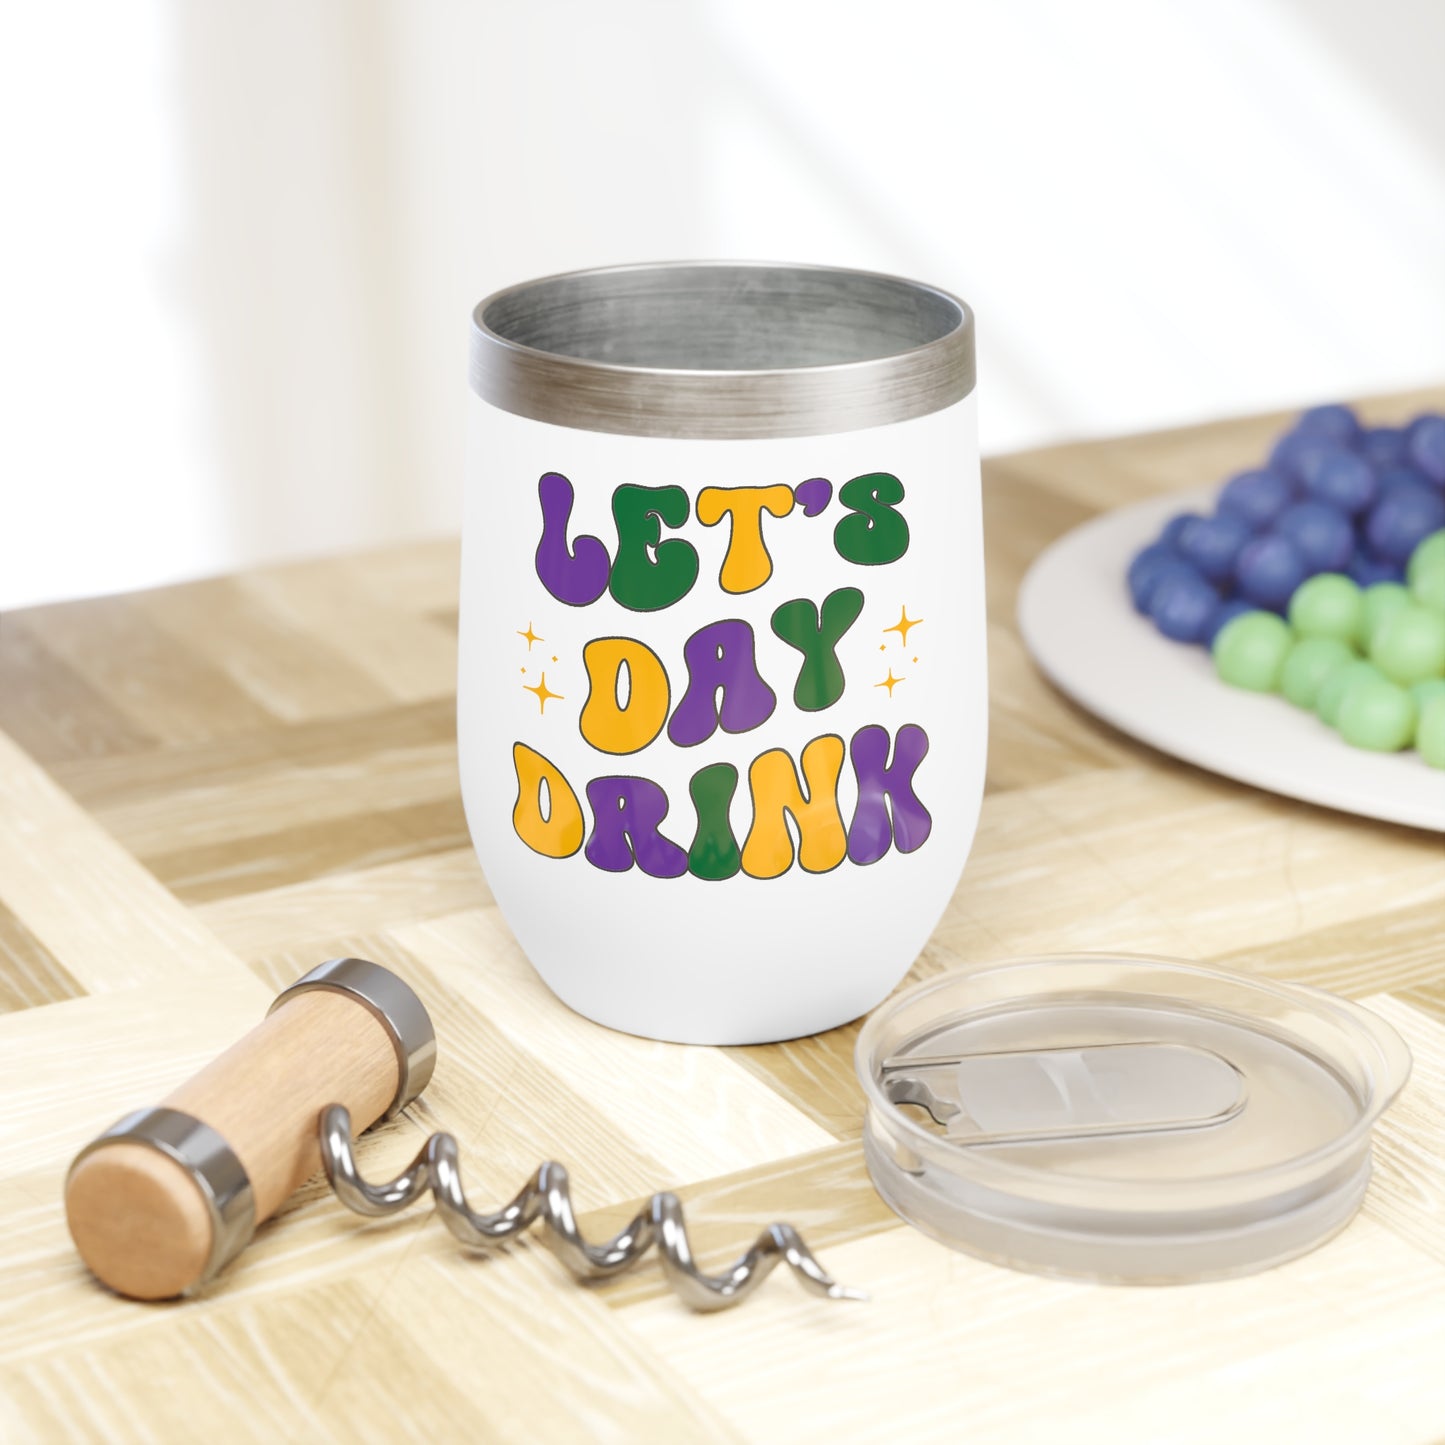 mardi gras themed wine tumbler that says "let's day drink"